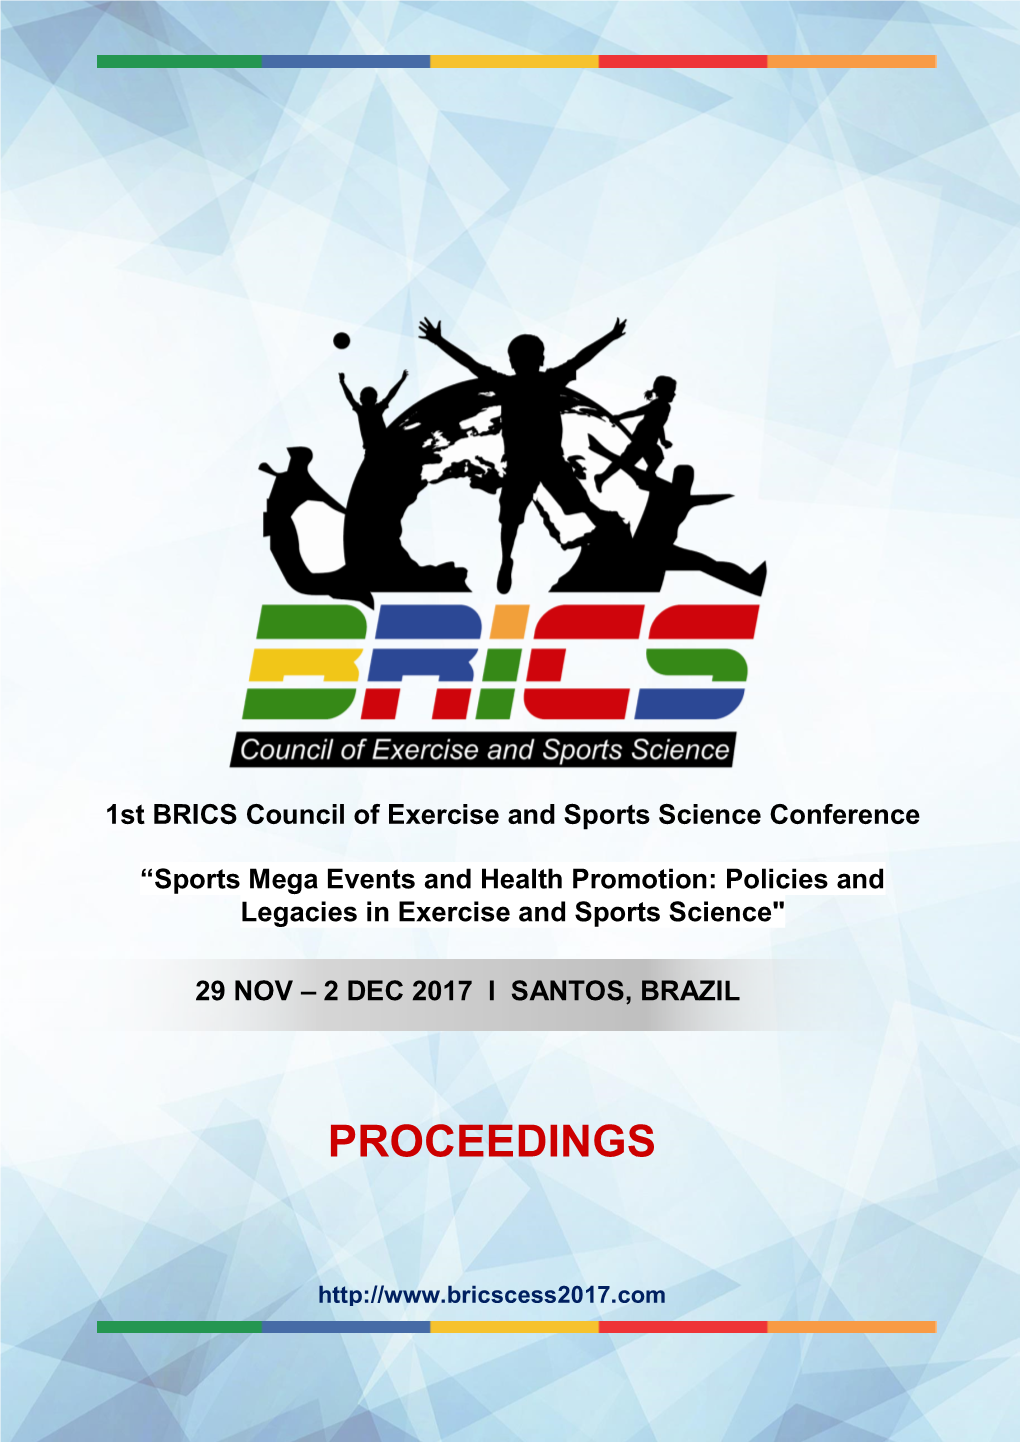 1St BRICS Council of Exercise and Sports Science Conference